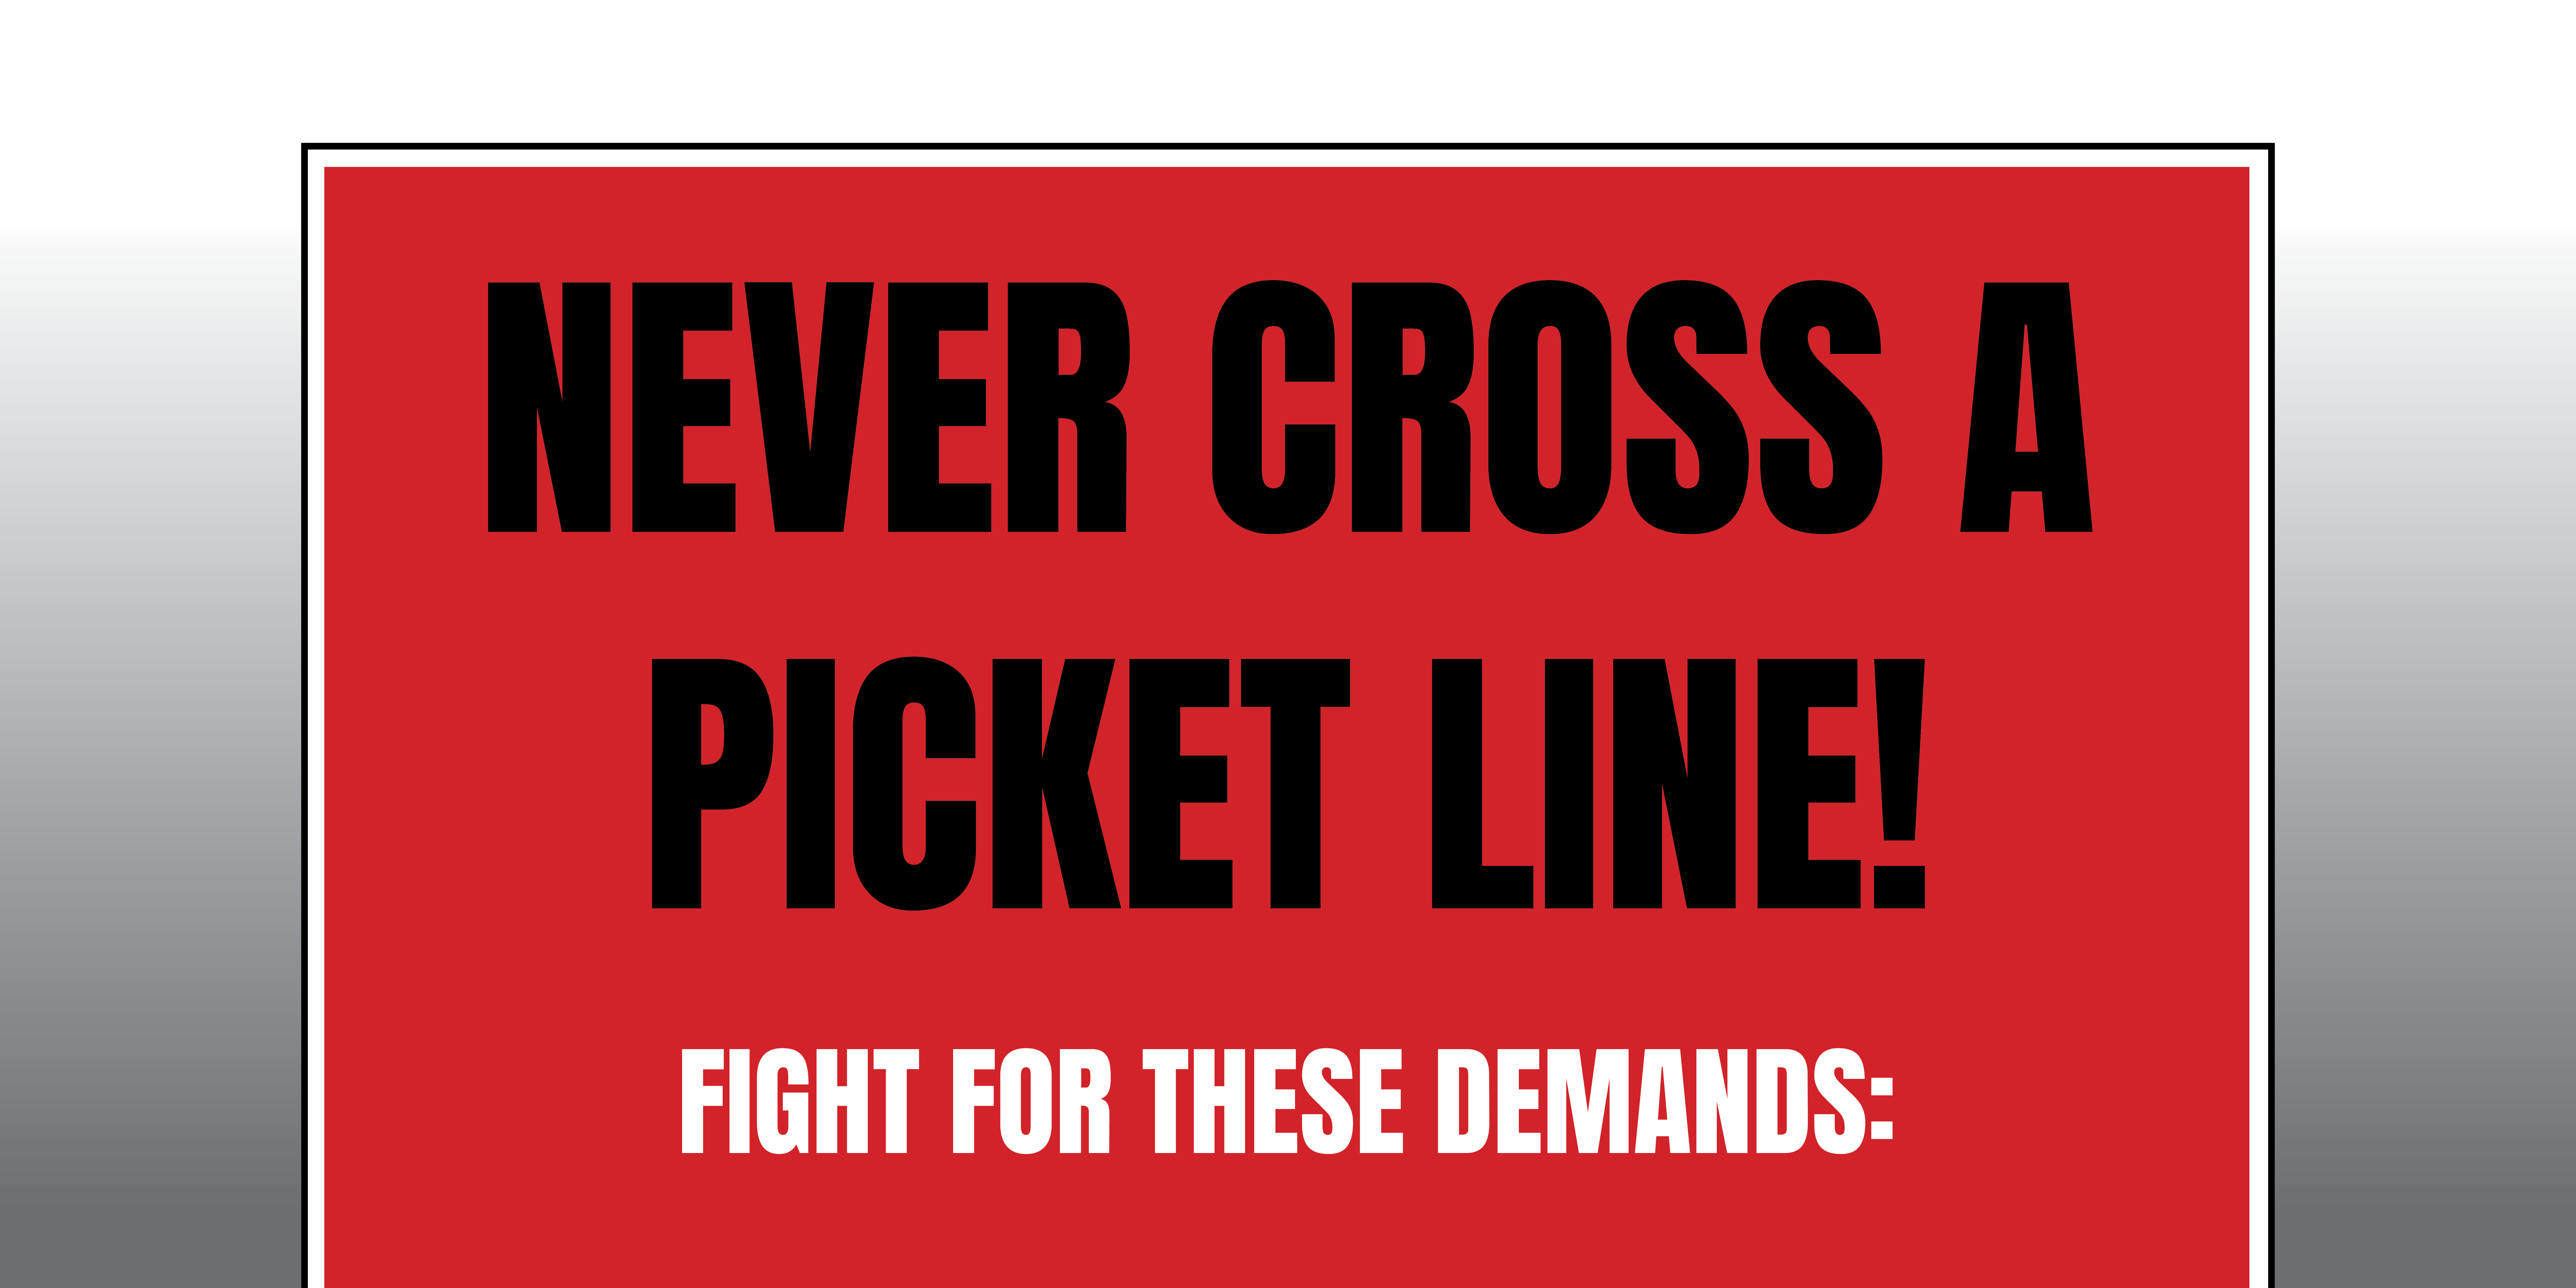 NEVER CROSS A PICKET LINE!